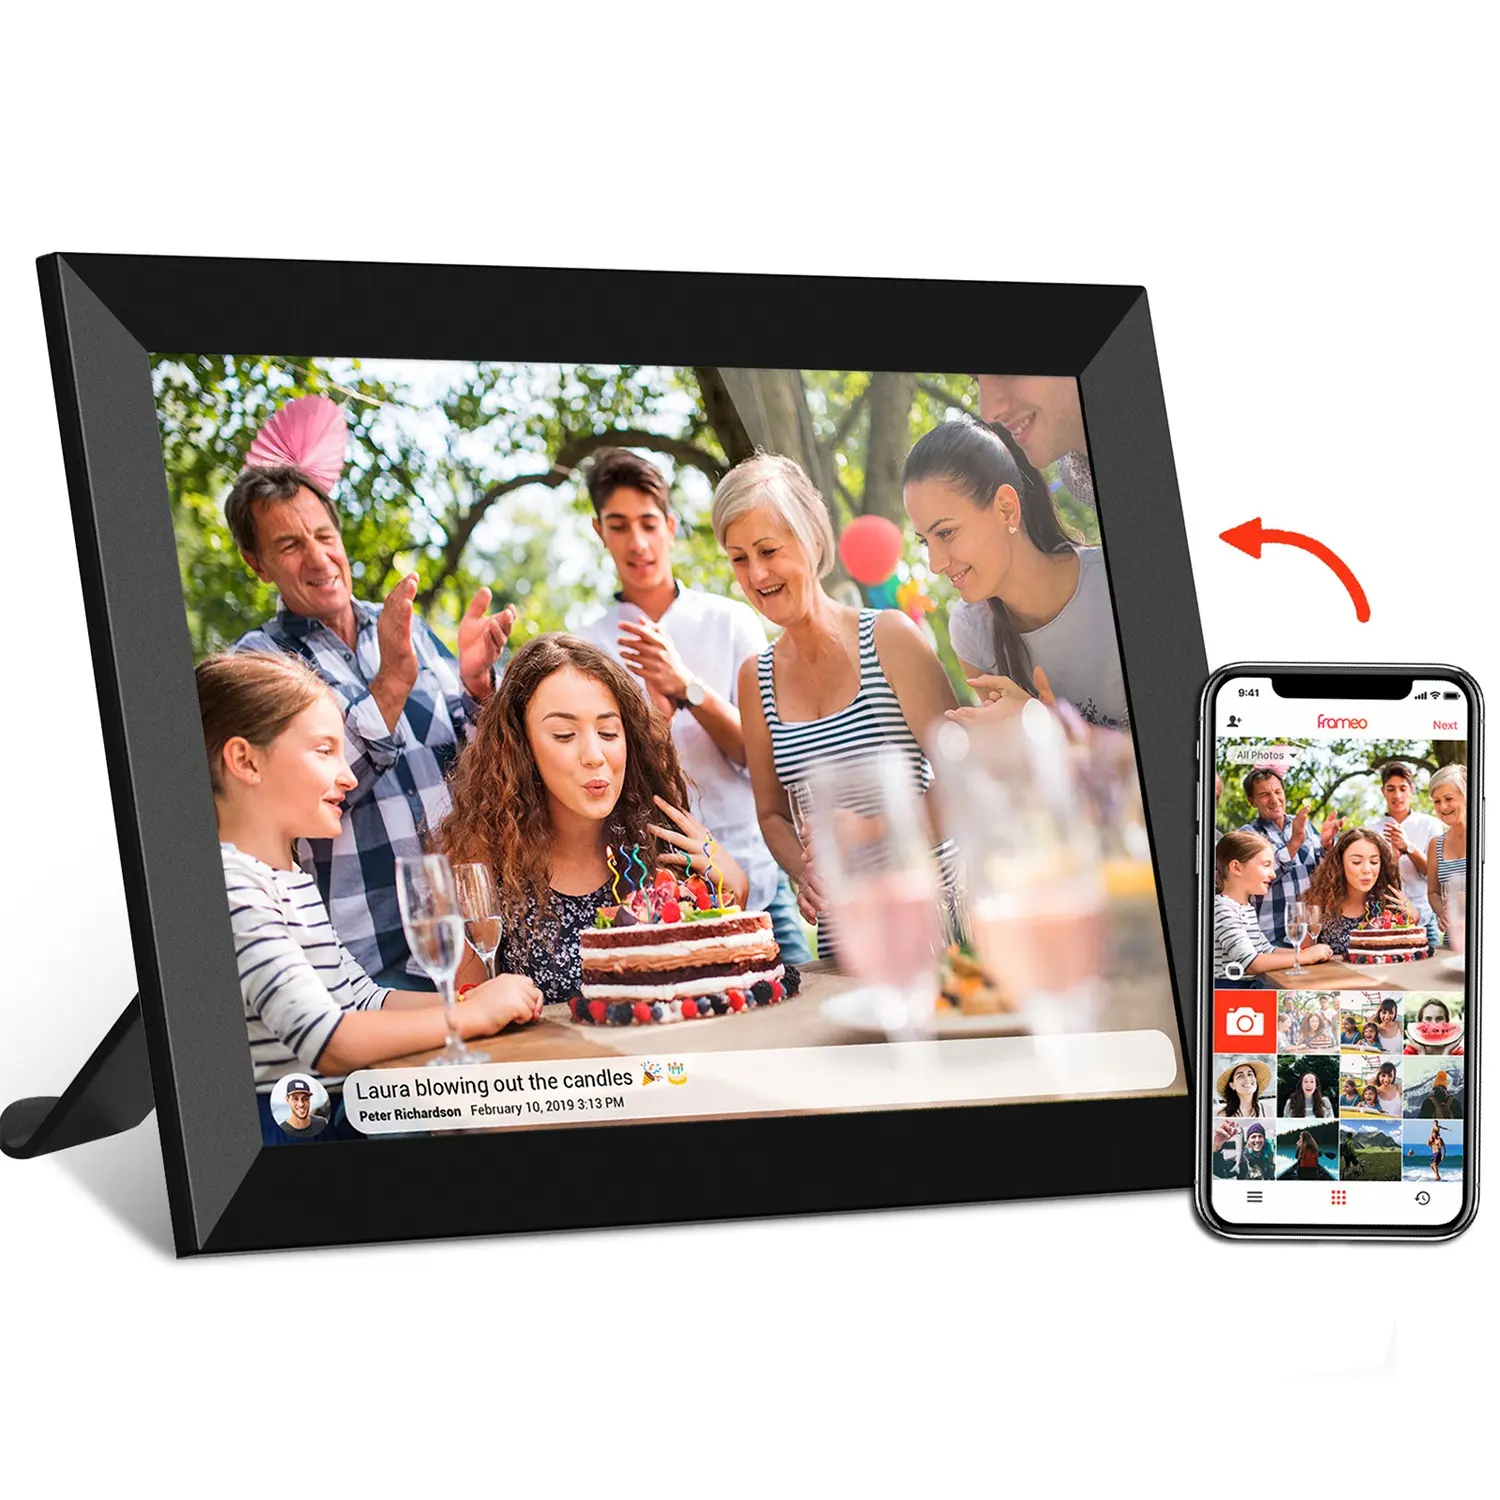 large stock Frameo app 10.1" Touch Screen Wall-Mountable Send Photos Video everywhere WiFi Cloud Digital Picture Frames